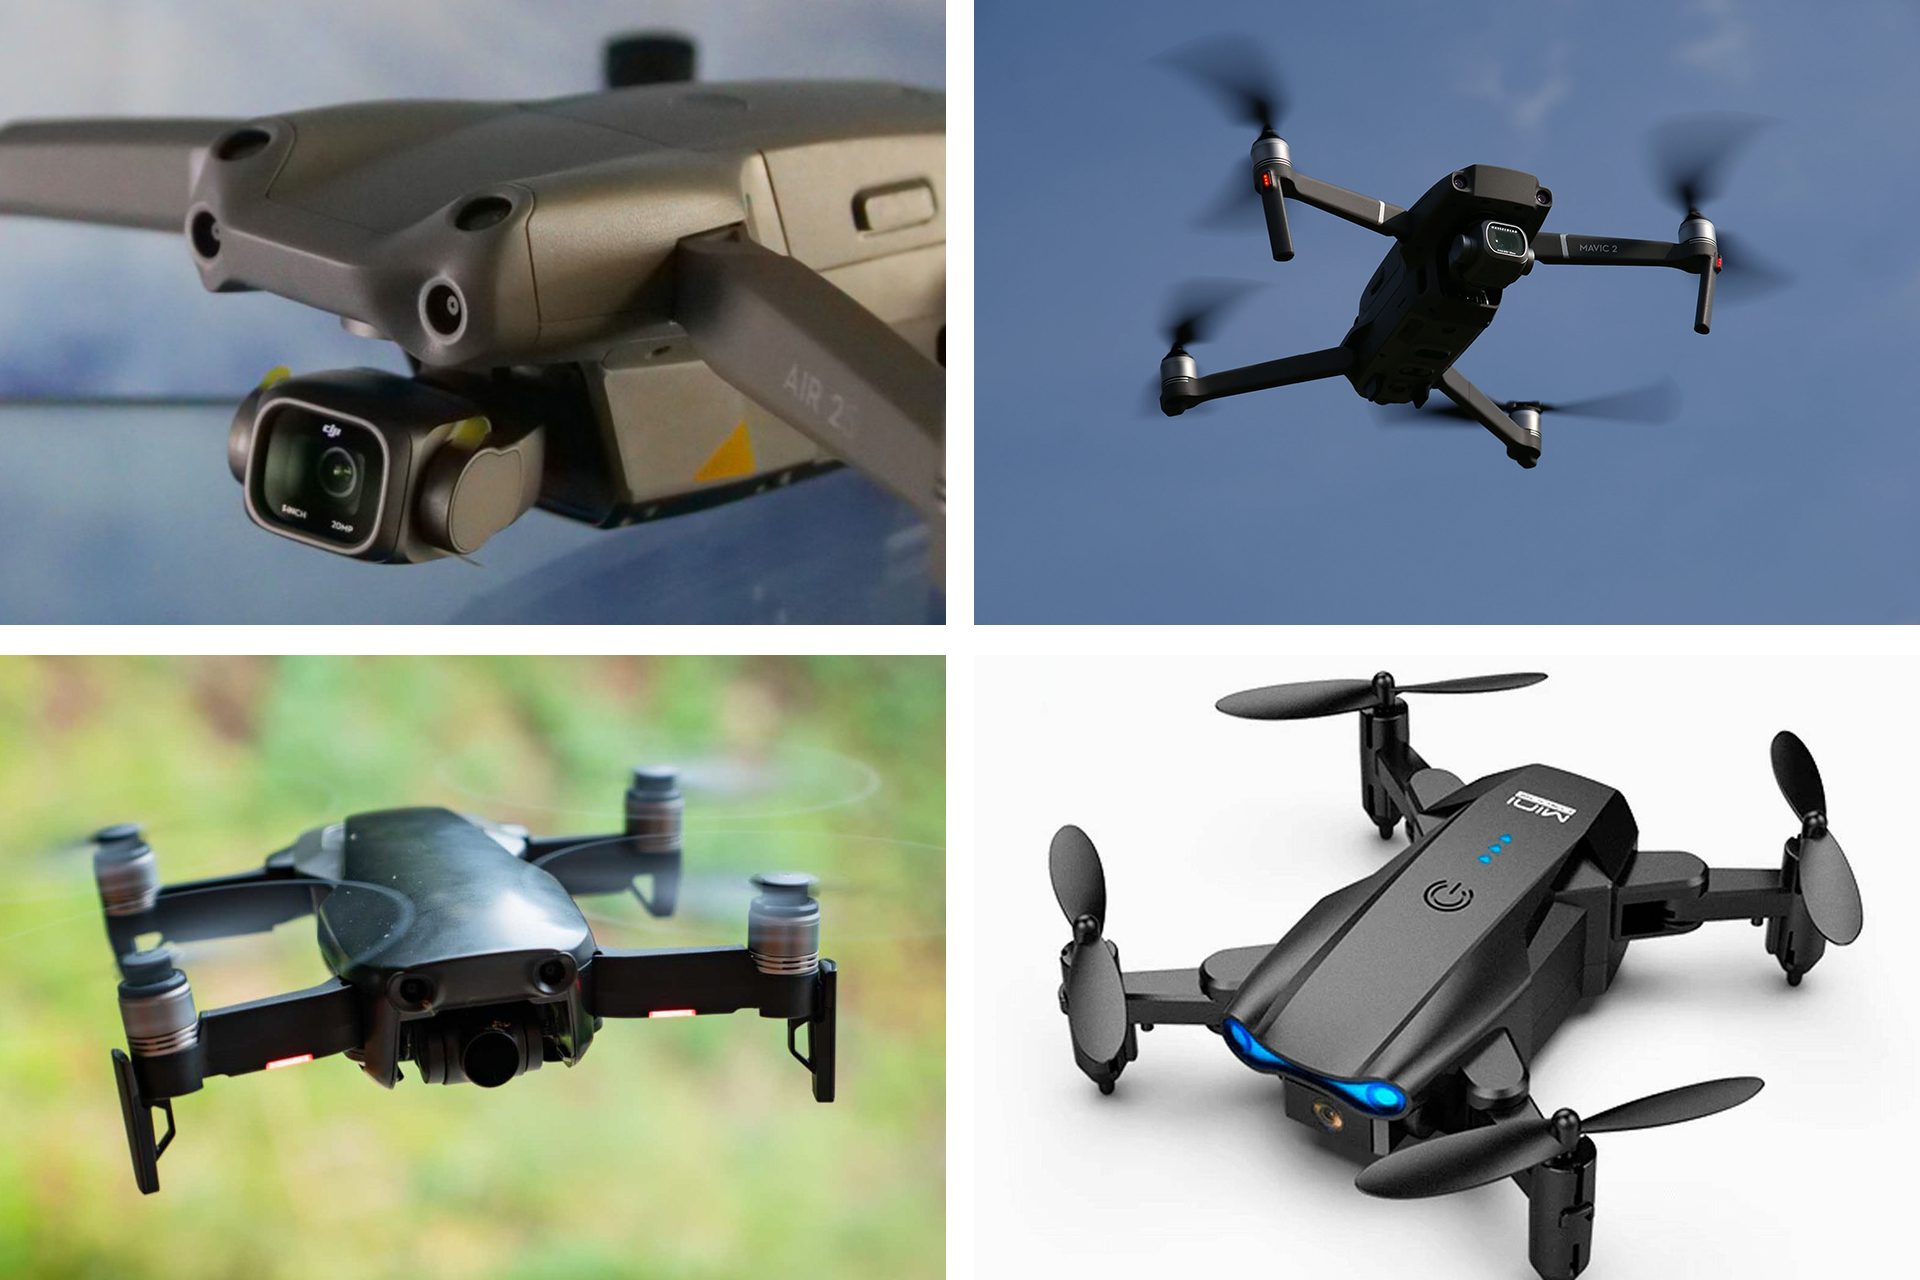 Best Drones Under 1000 Dollars in 2023: Professionally With These 3 • Filmmaking Lifestyle